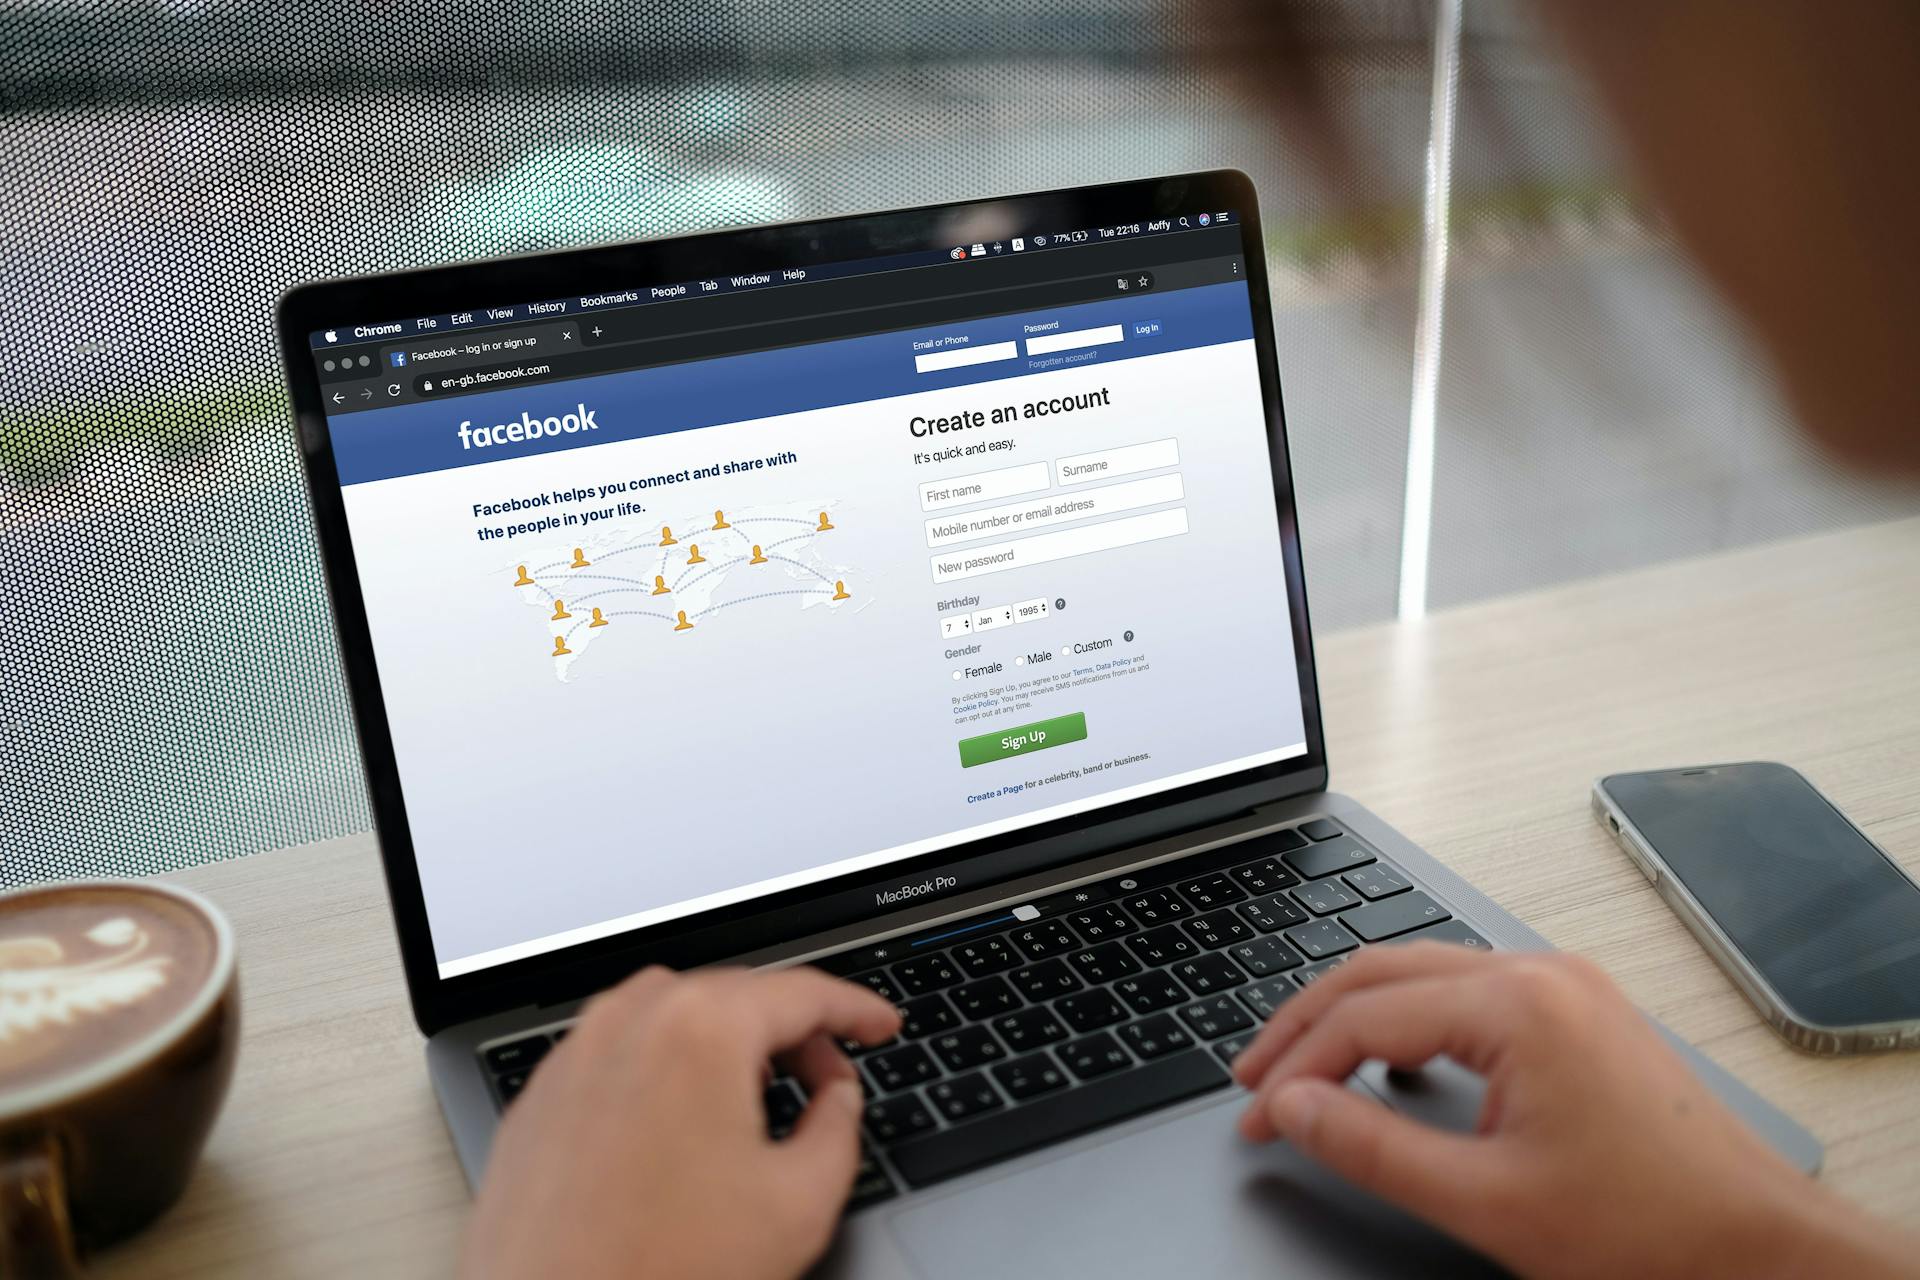 Image of a laptop on a desk with a facebook login image displayed.